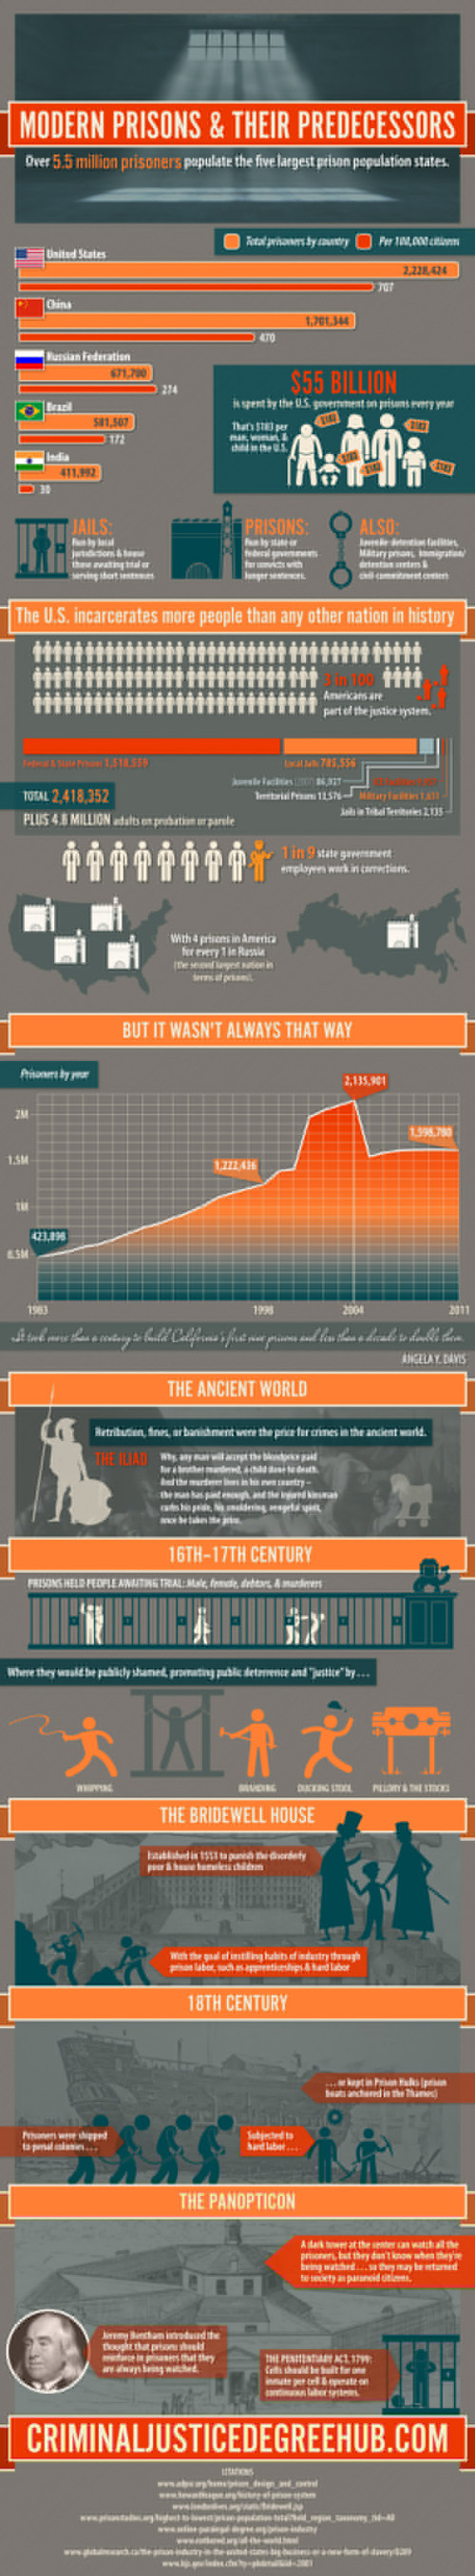 History of prisons